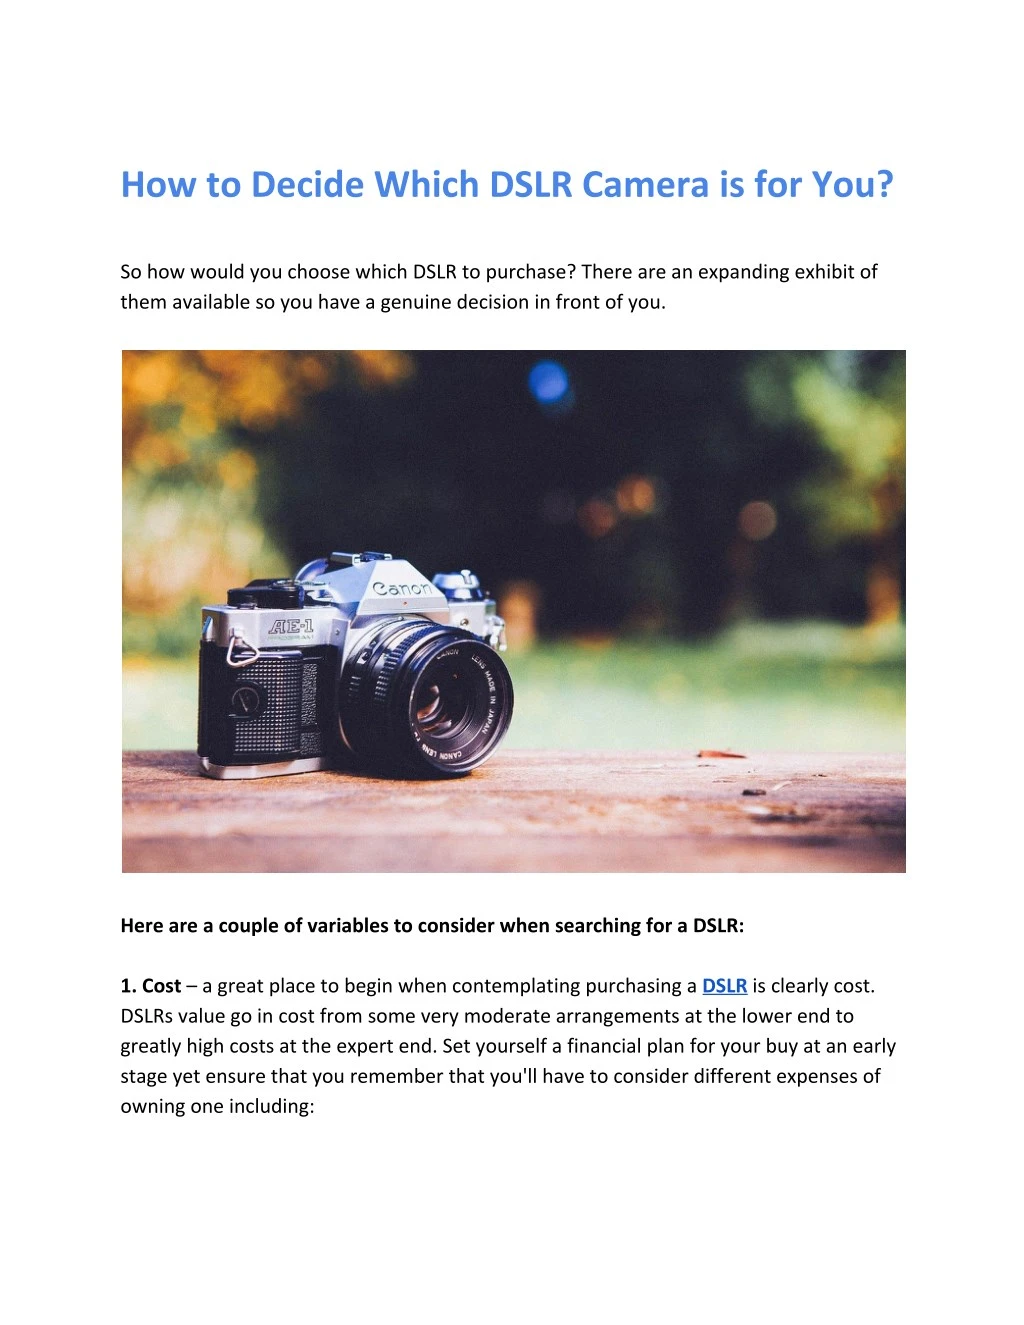 how to decide which dslr camera is for you